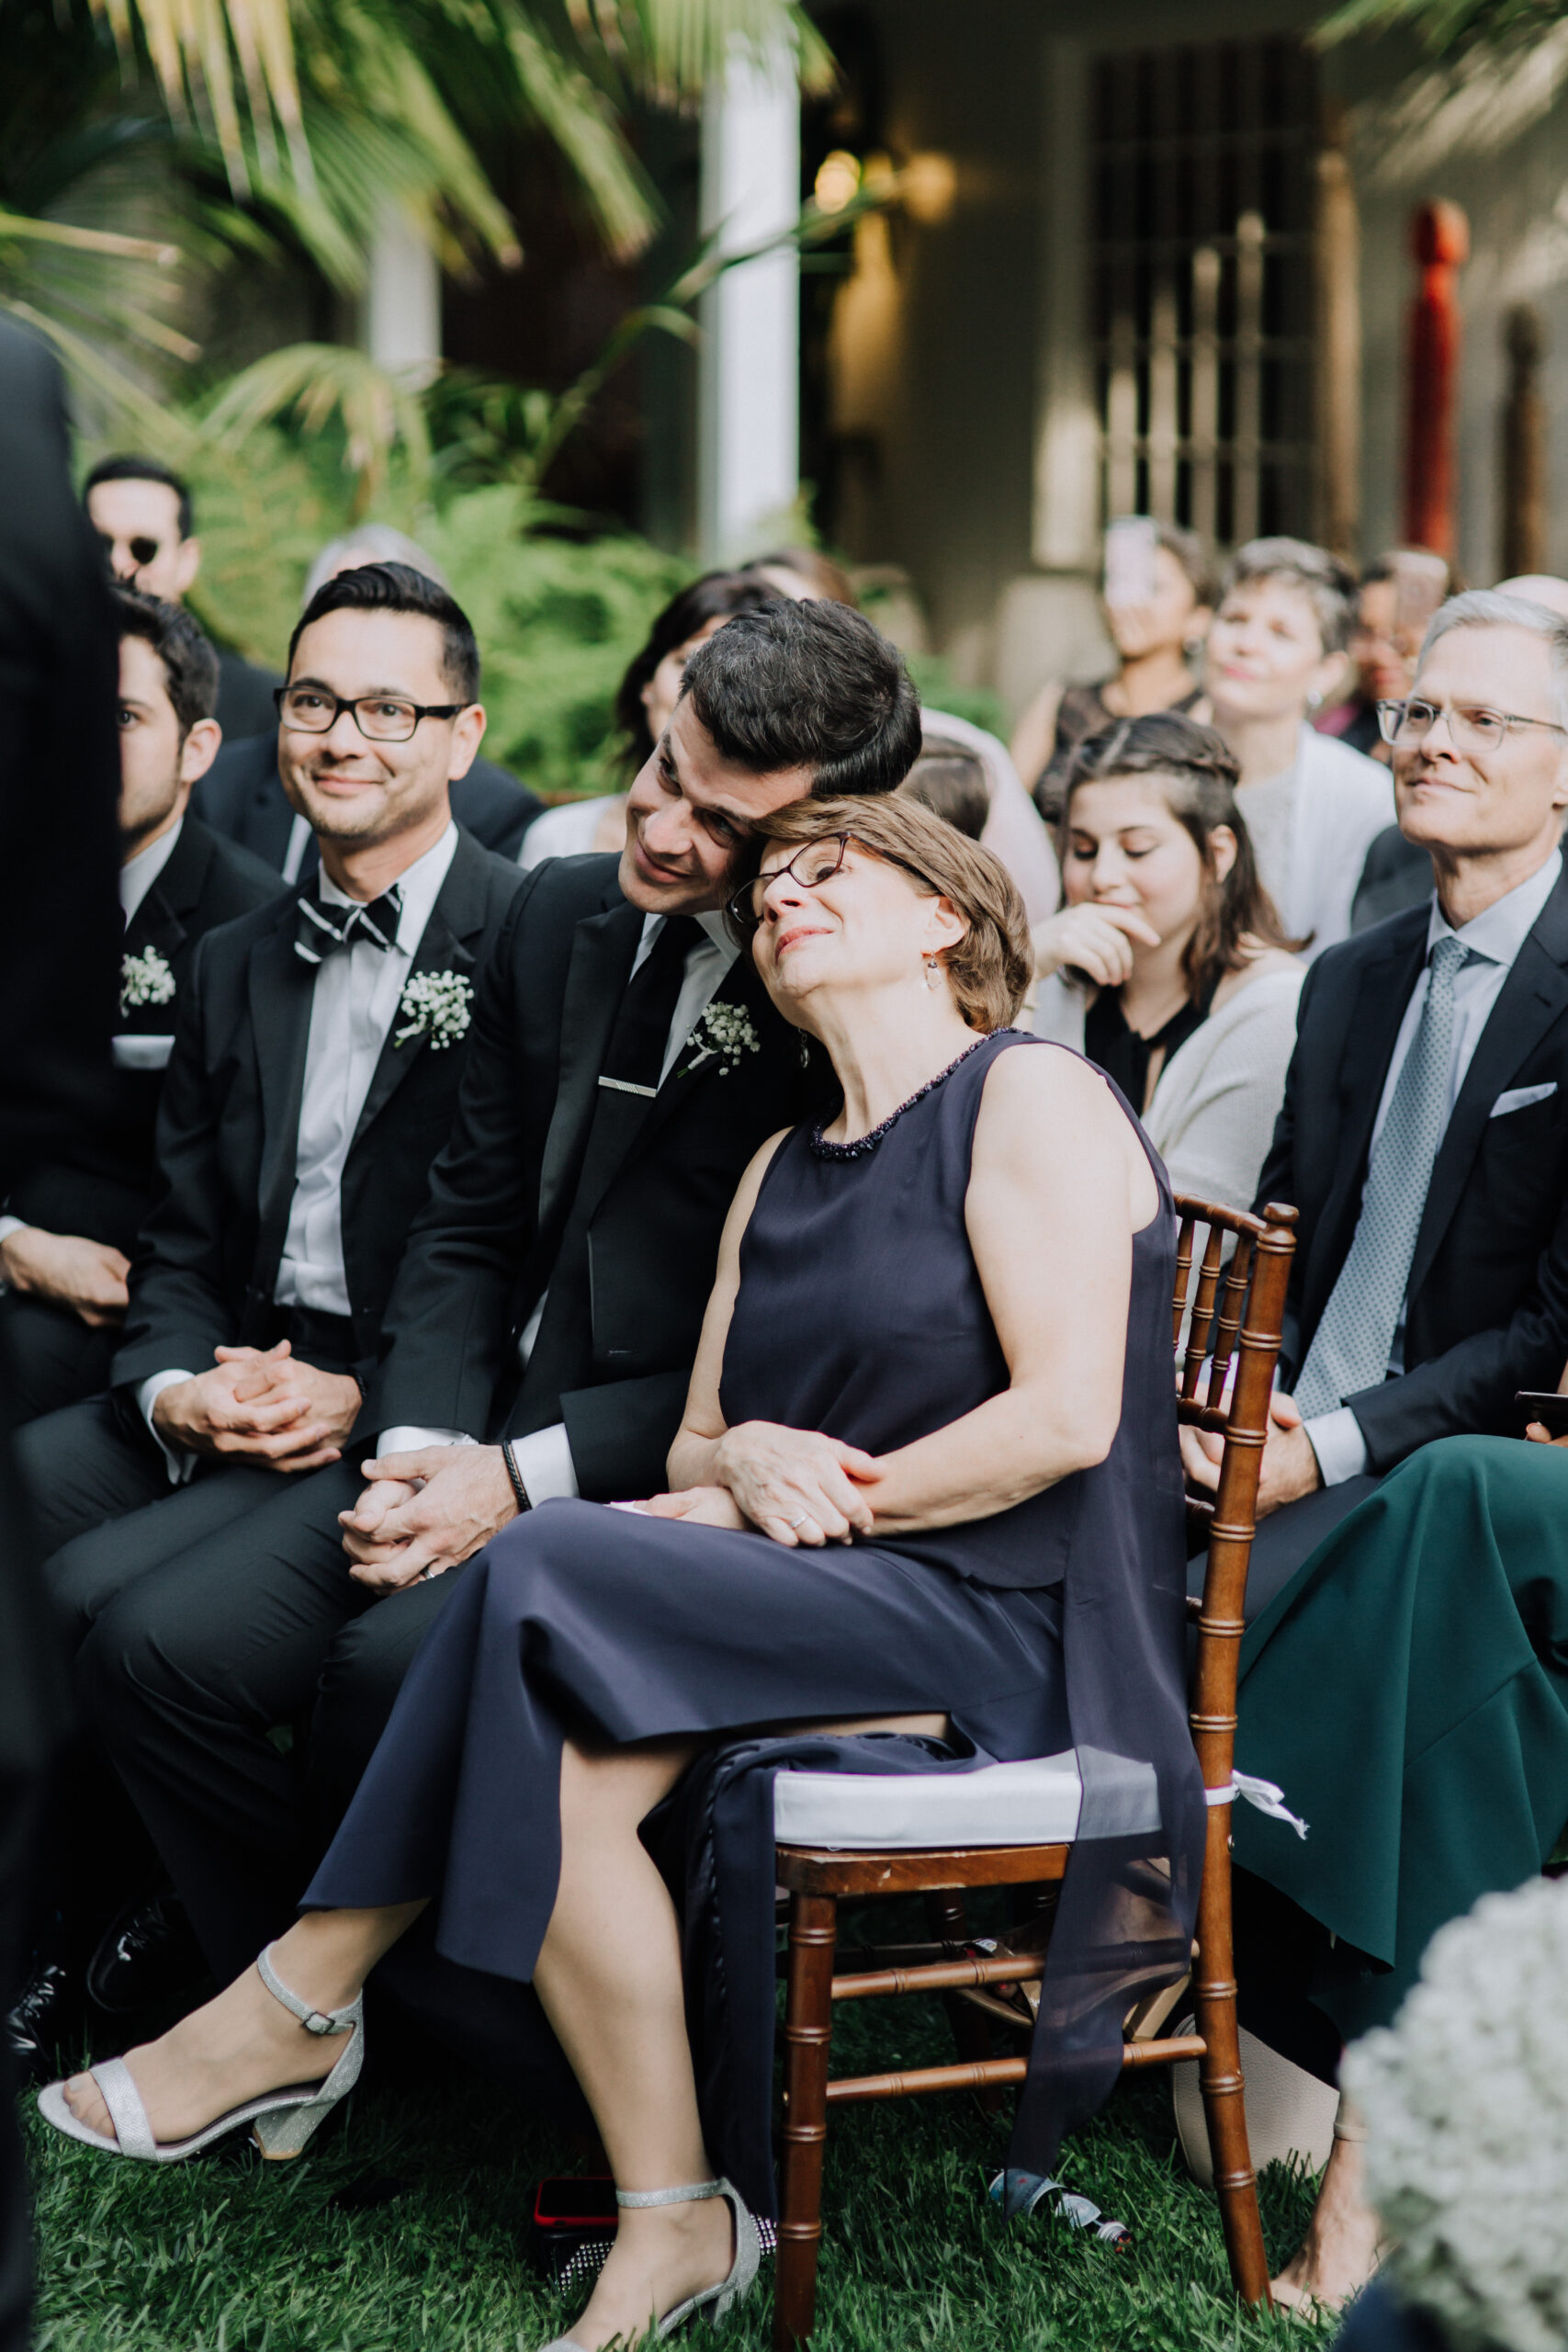 guests look on during the dreamy backyard wedding ceremony 